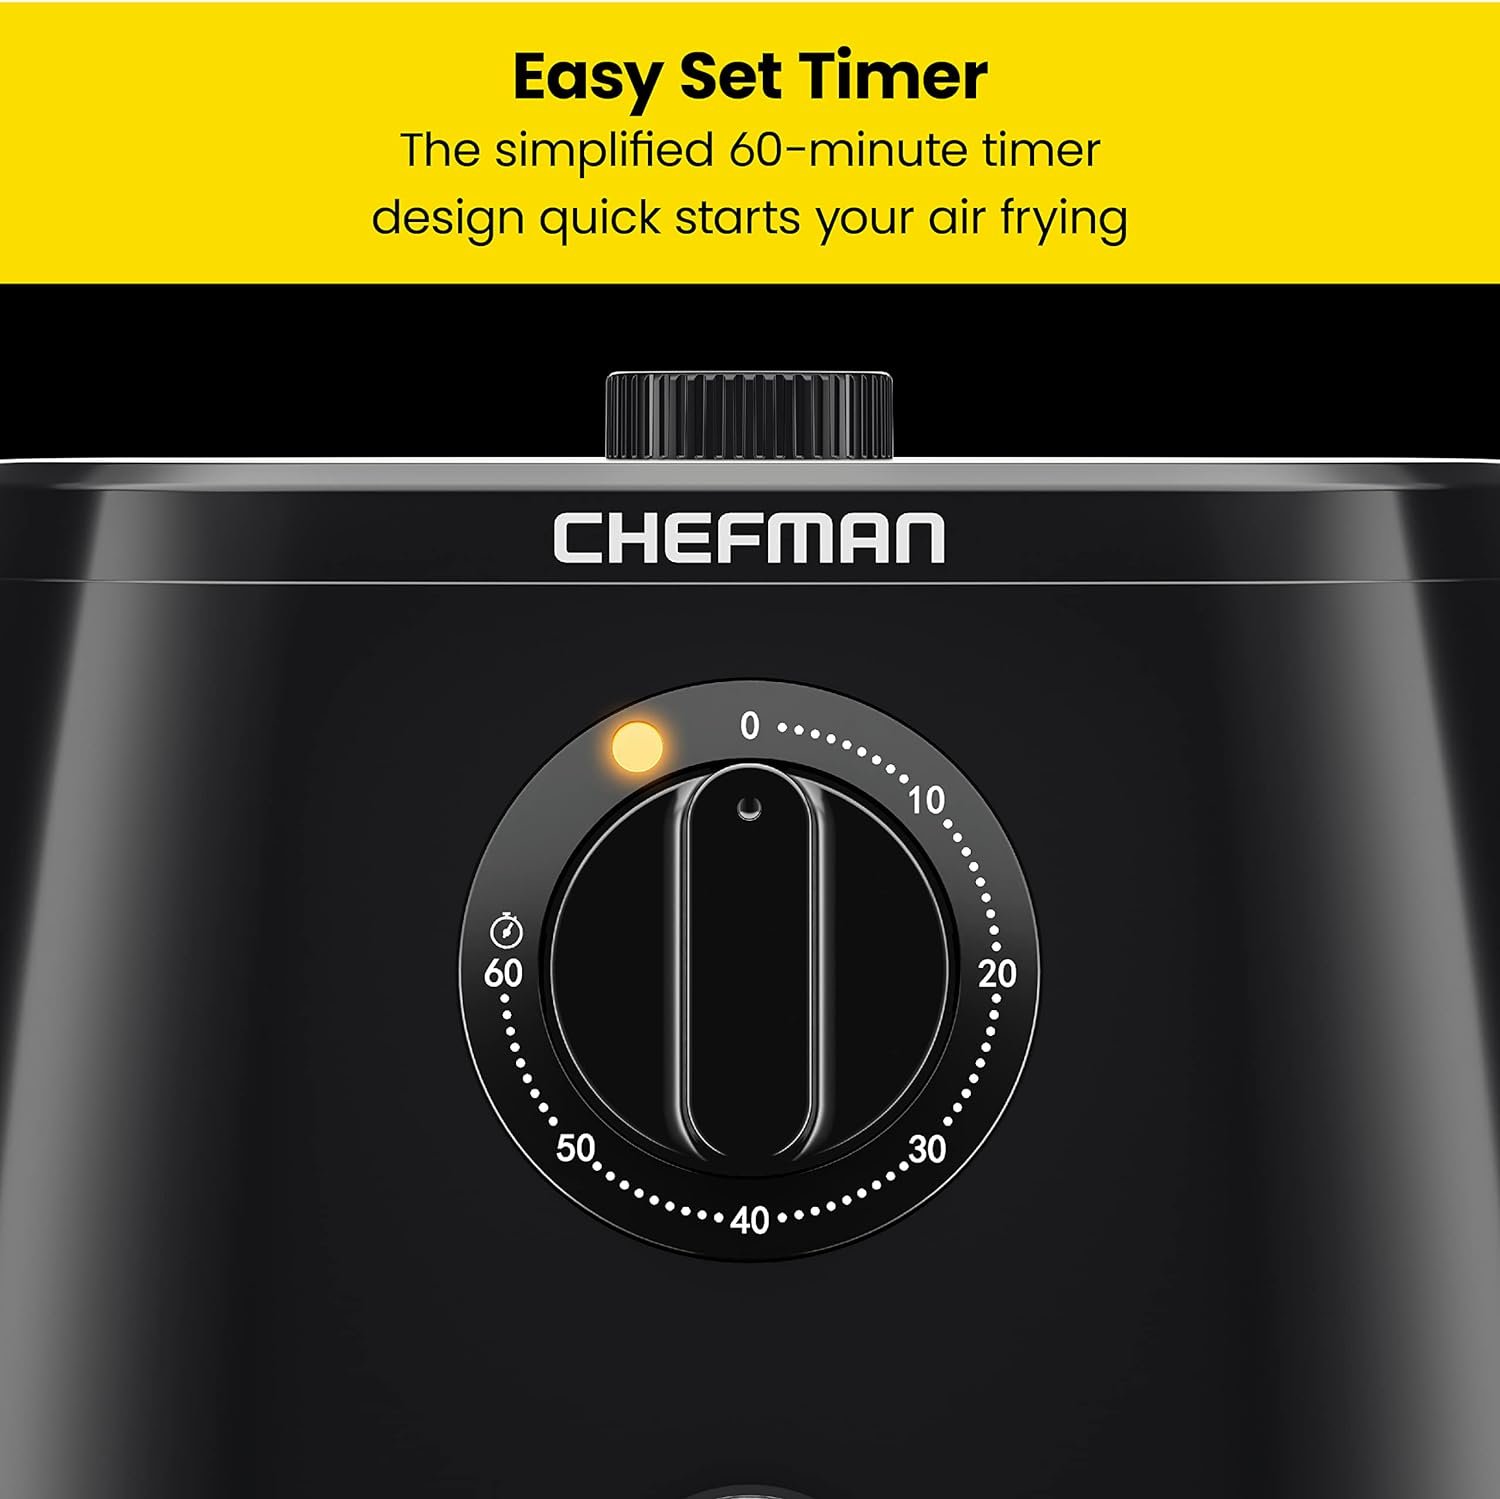 Chefman TurboFry 2-Quart Air Fryer, Dishwasher Safe Basket  Tray, Use Little to No Oil For Healthy Food, 60 Minute Timer, Fry Healthier Meals Fast, Heat And Power Indicator Light, Temp Control, White